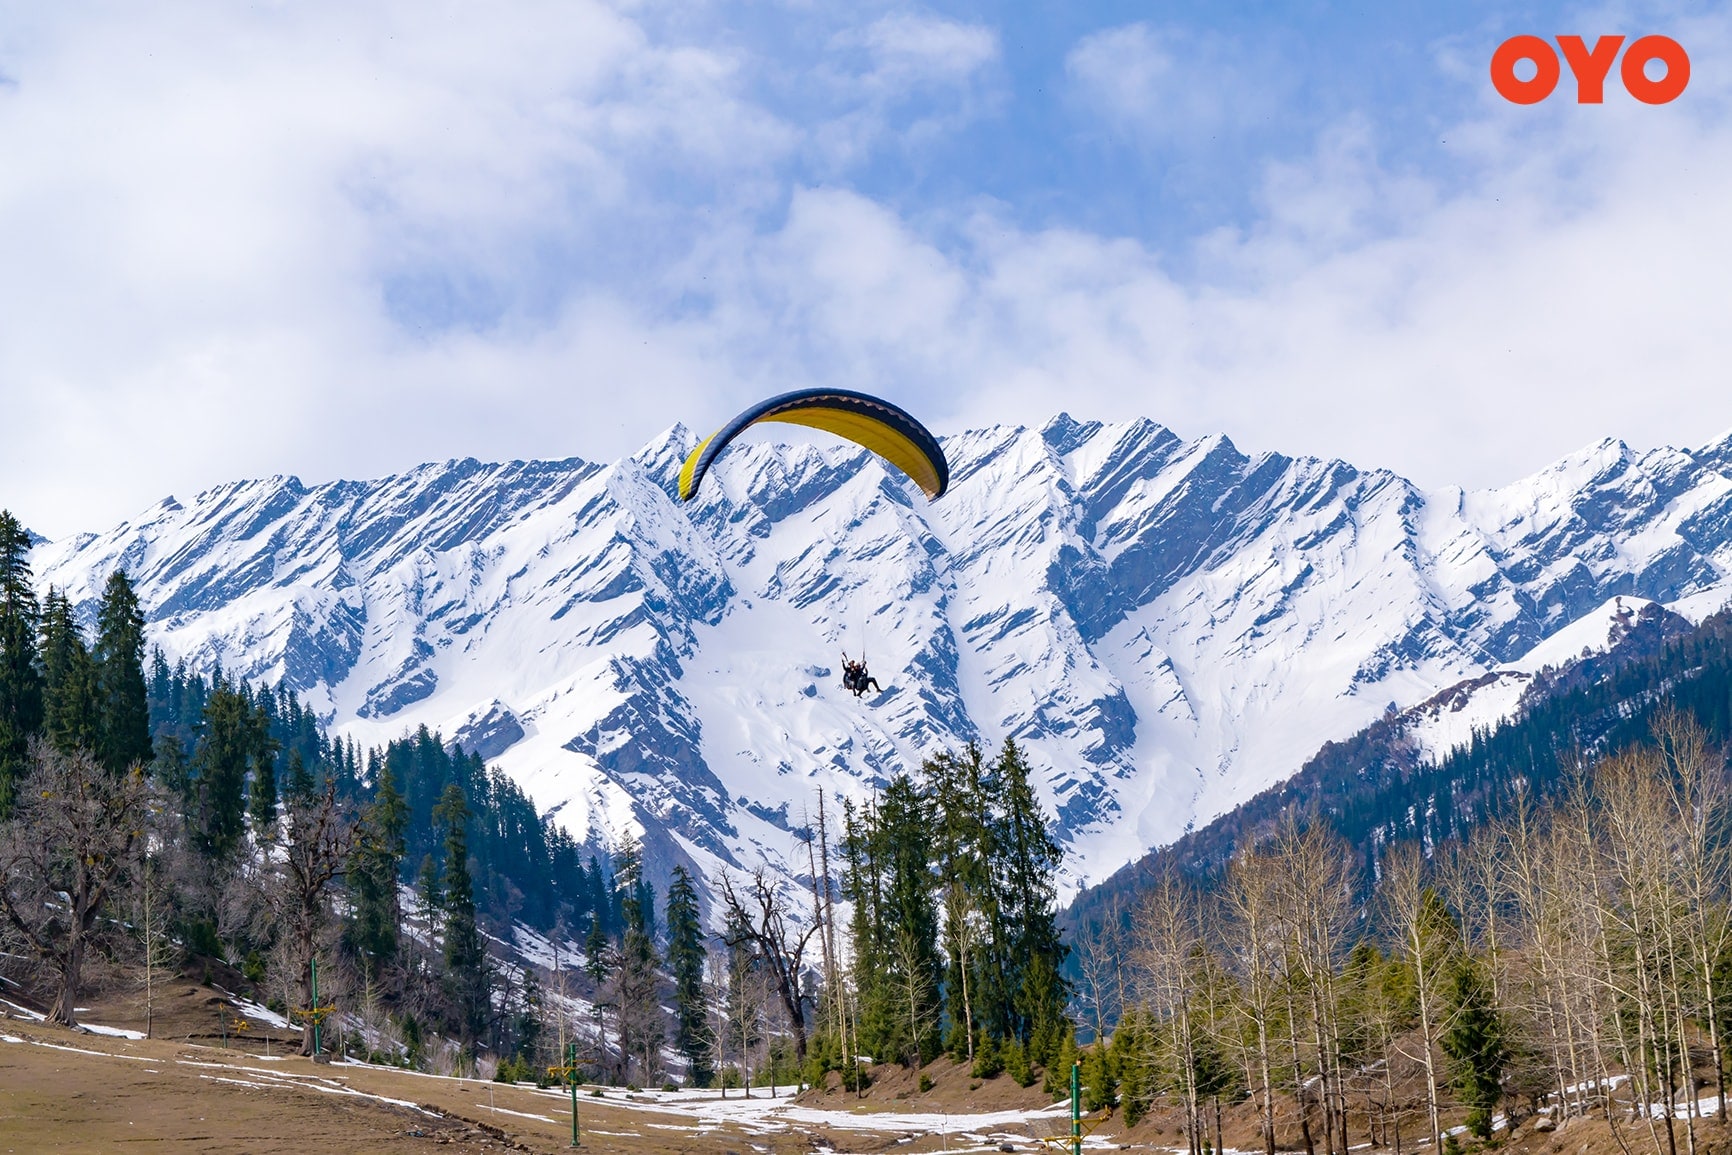 Manali - one of the best honeymoon places in India